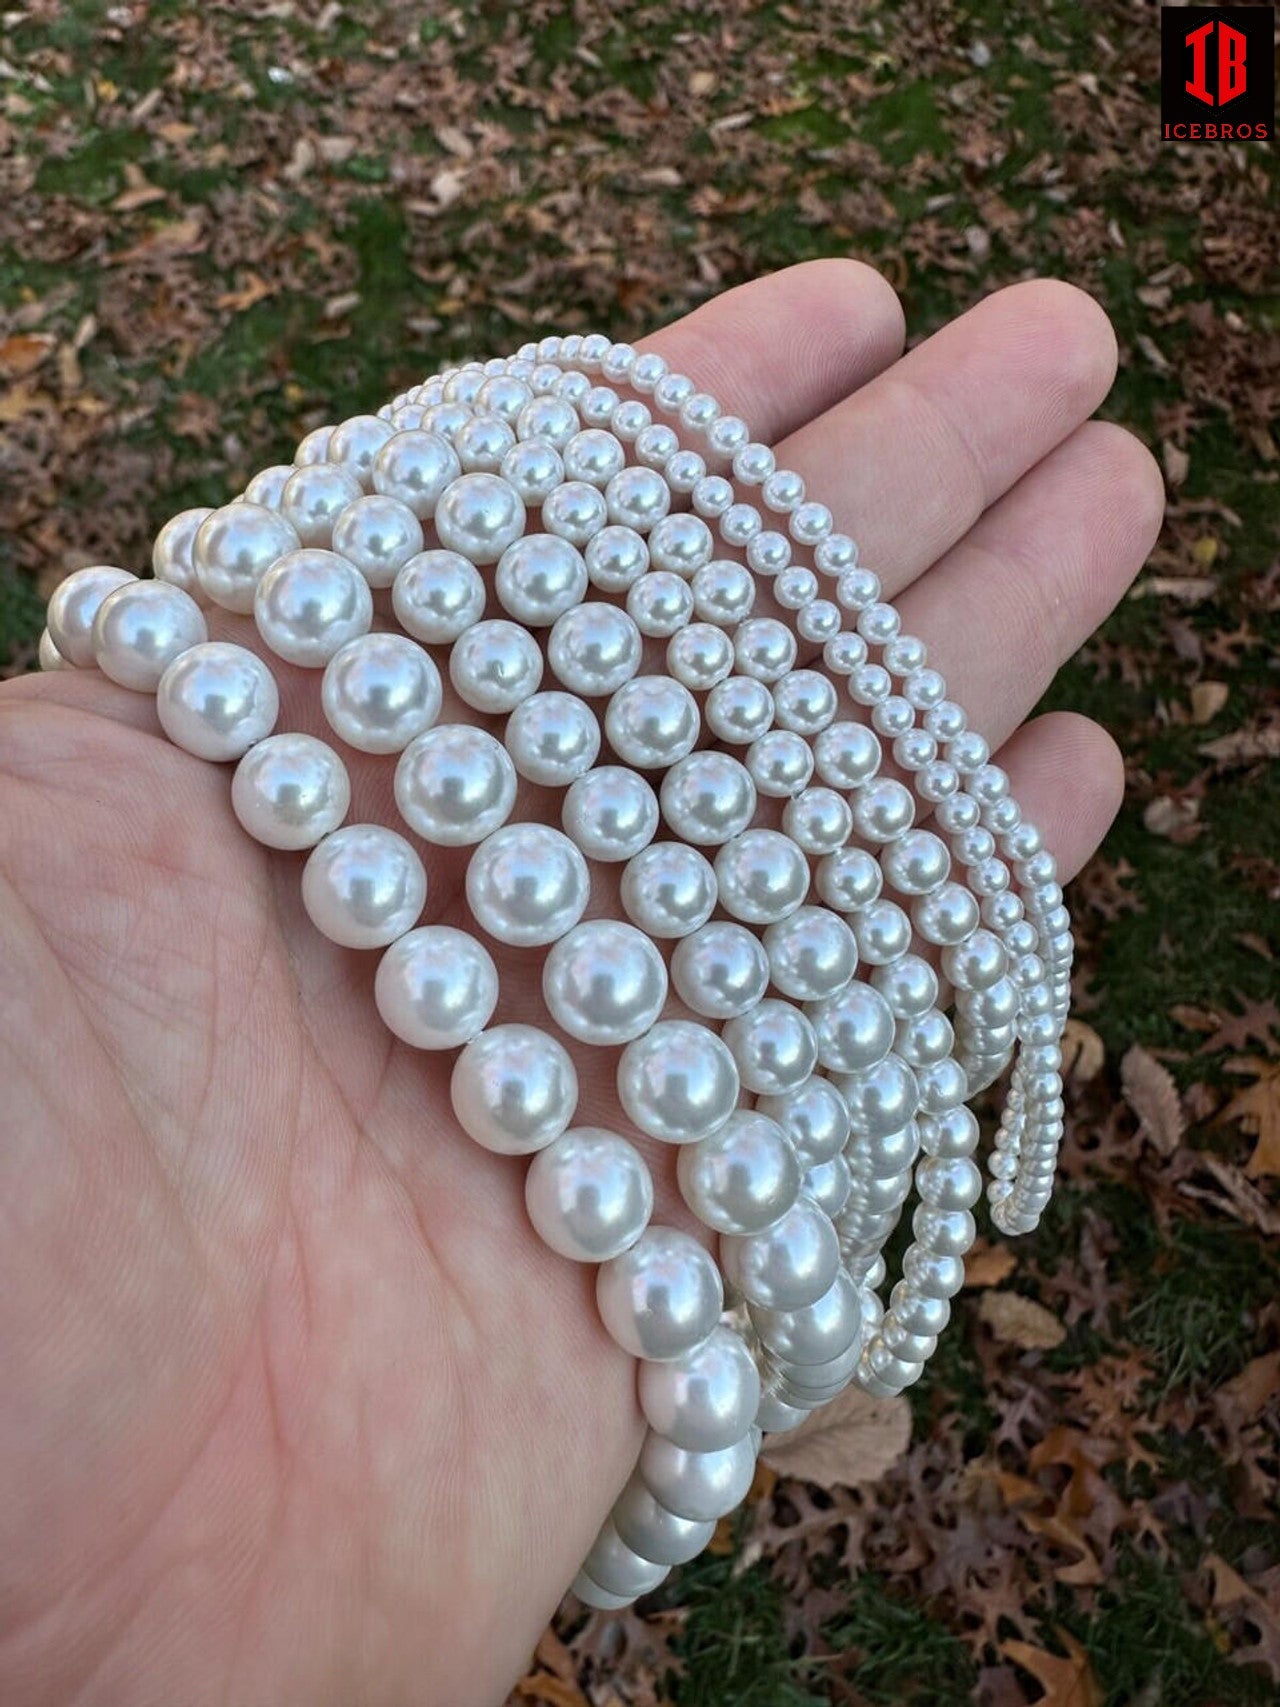 White Cultured Fresh Pearl Necklace On Hand 